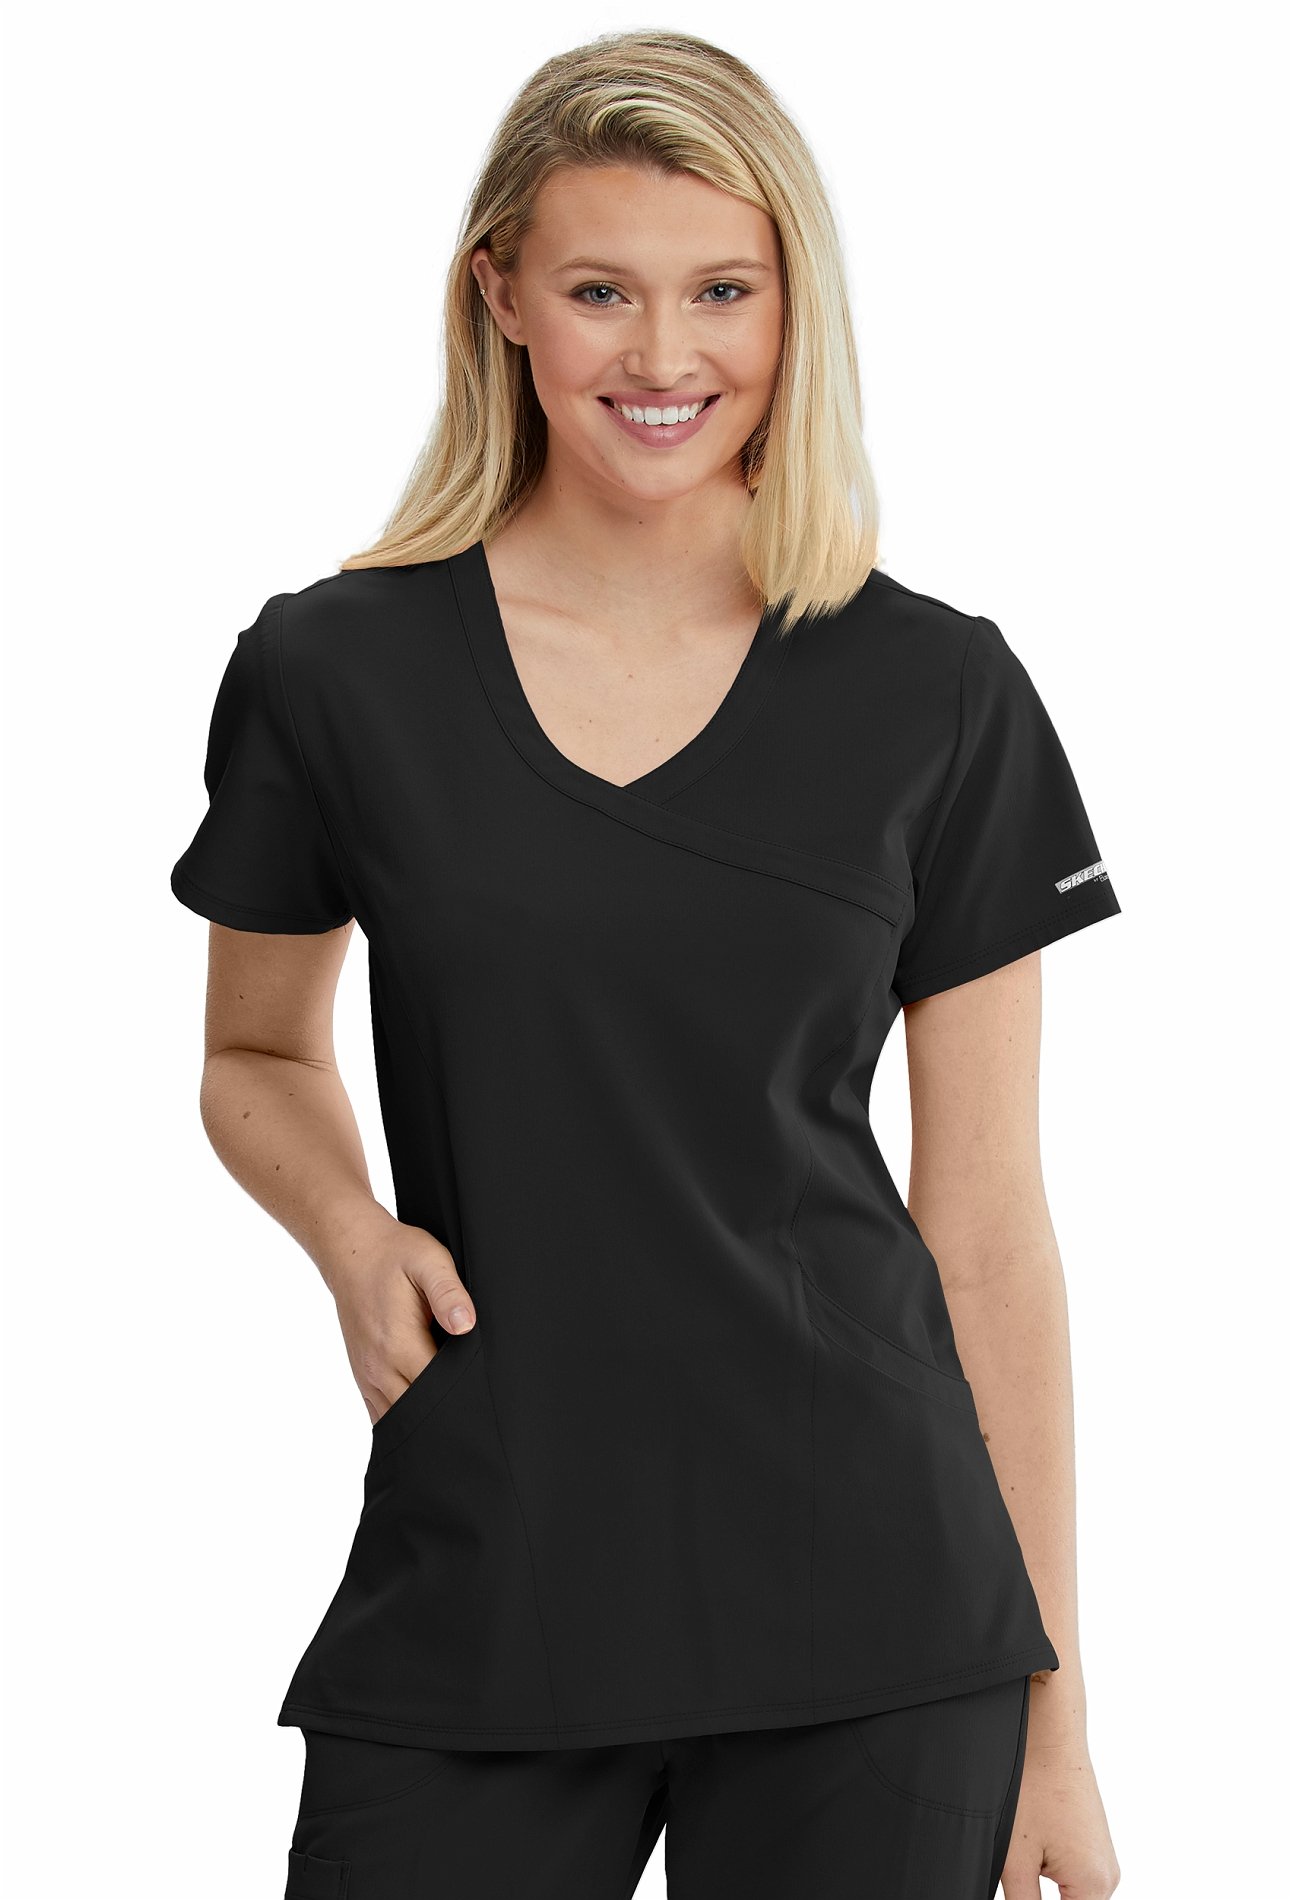 SKECHERS Stretch T-shirts for Women